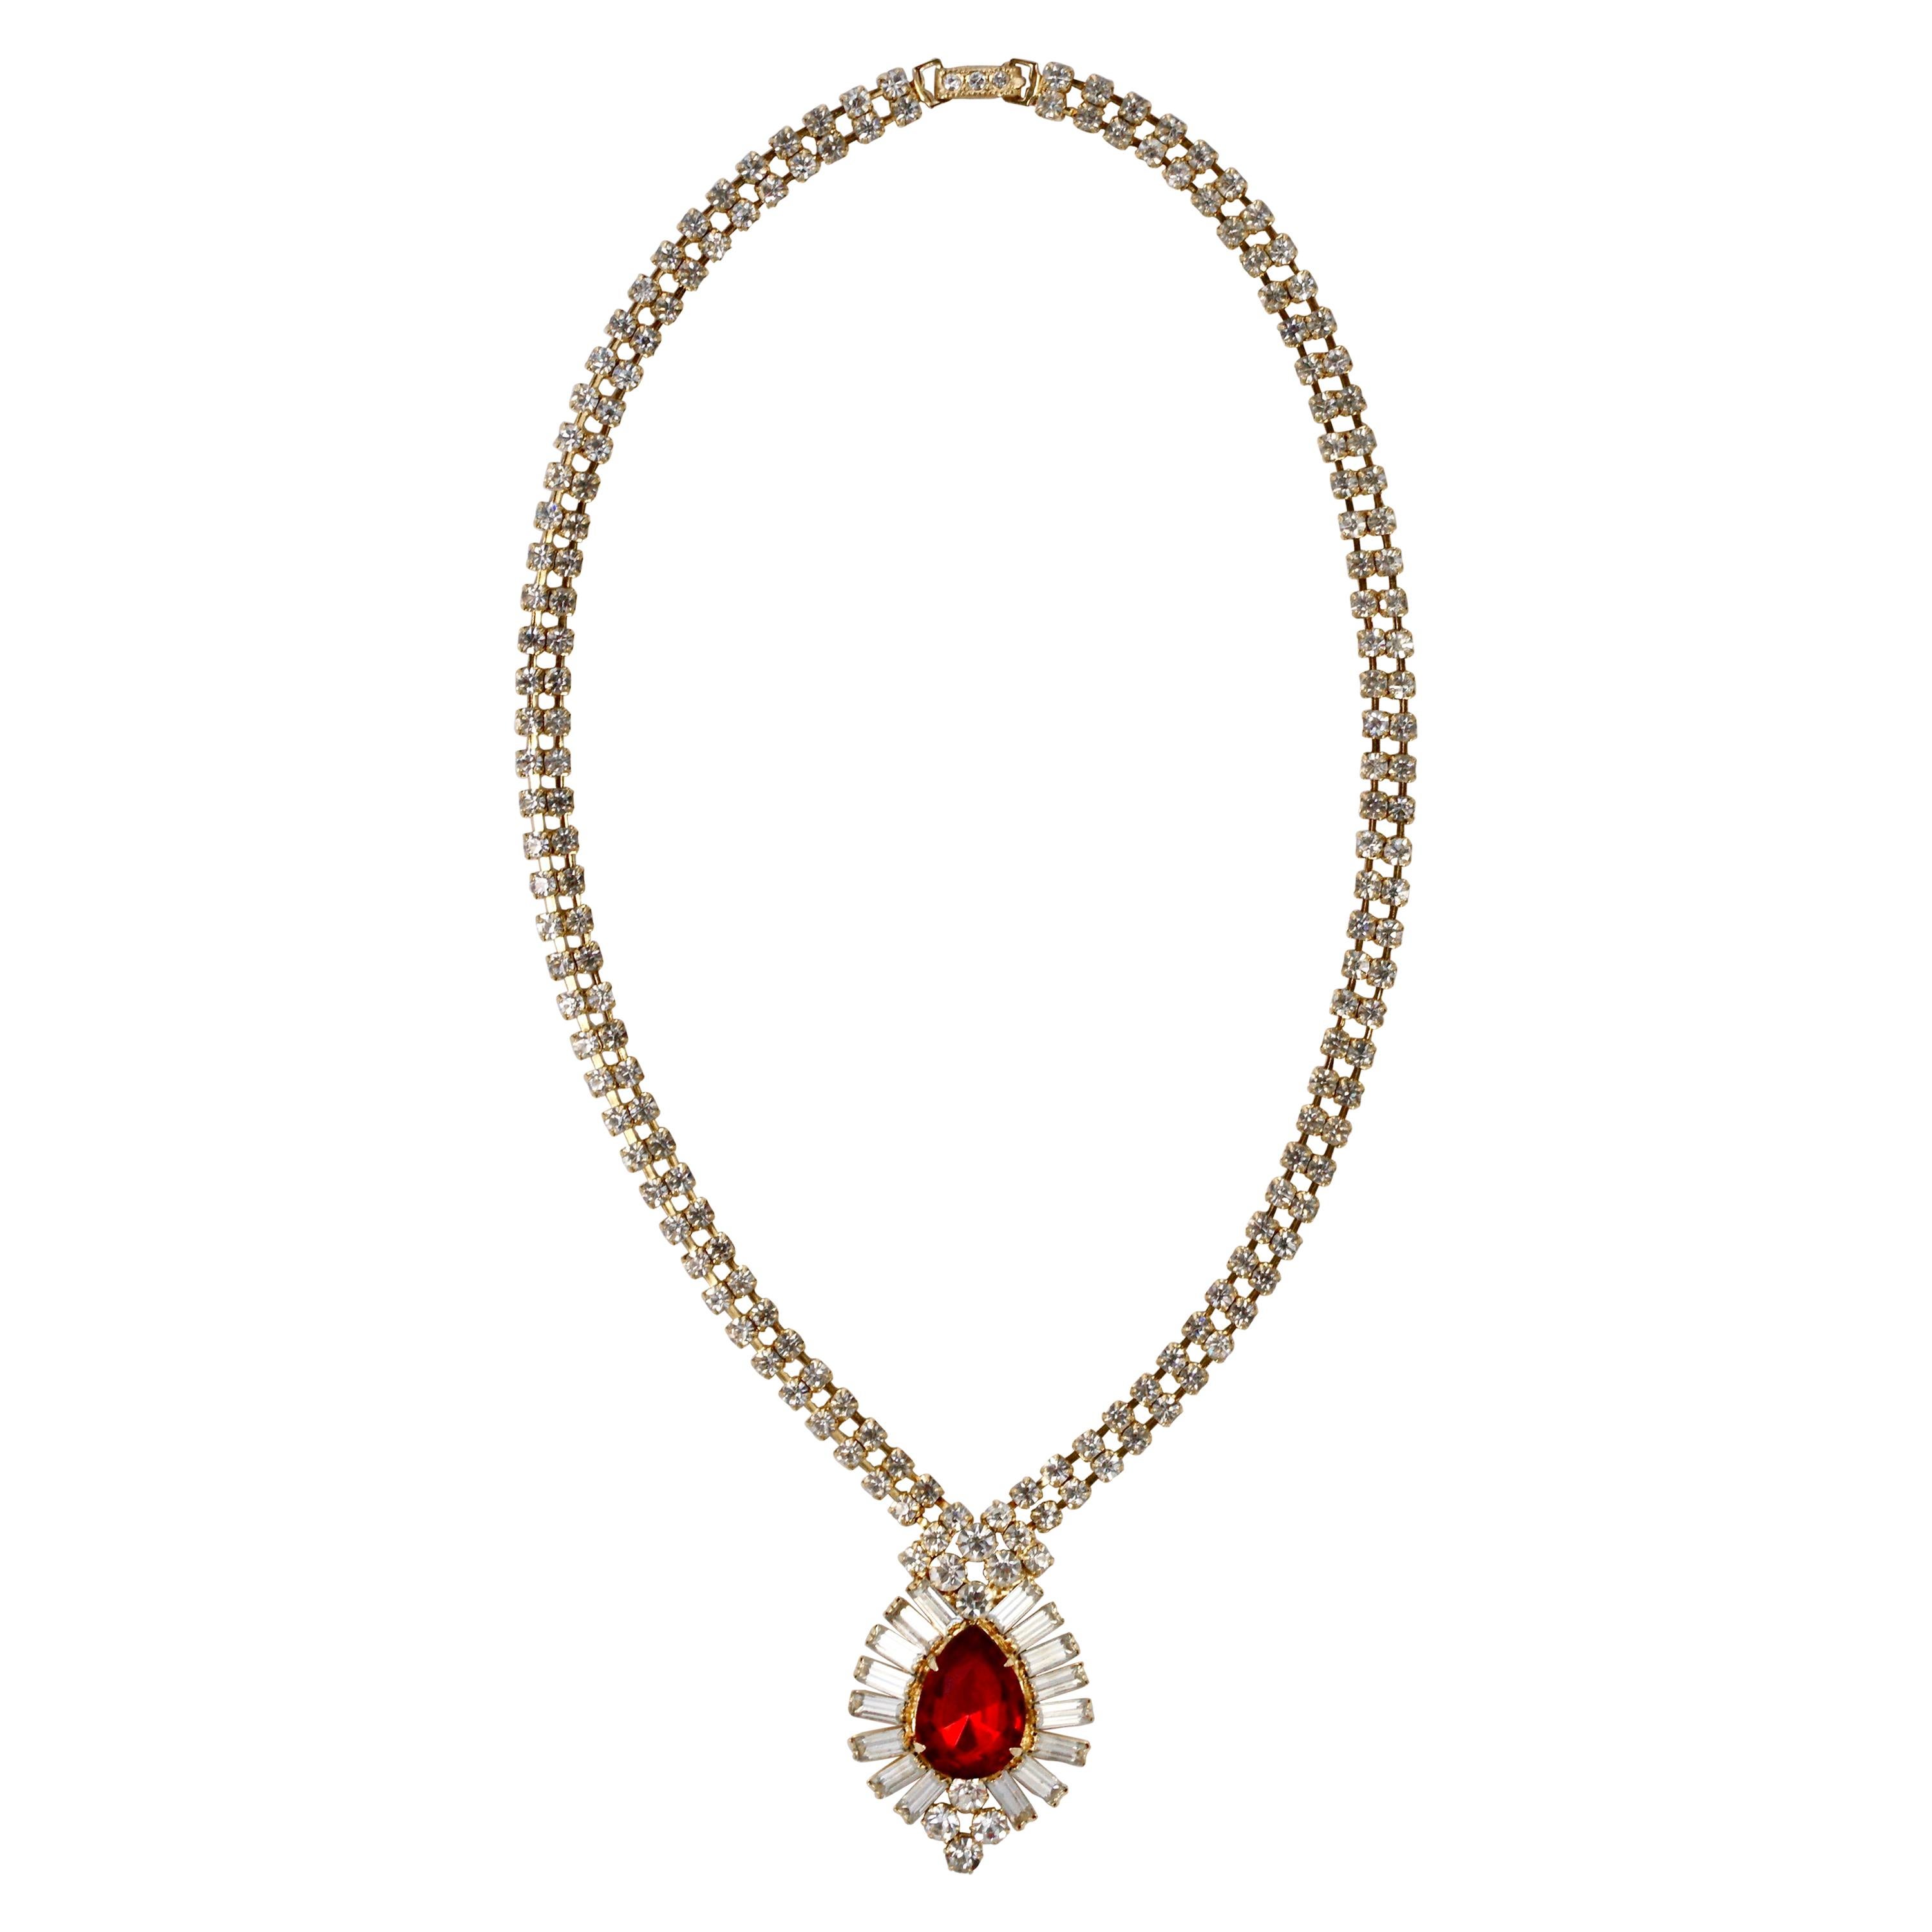  Gold Tone Pendant Necklace with Clear Rhinestones and a Red Rhinestone Teardrop